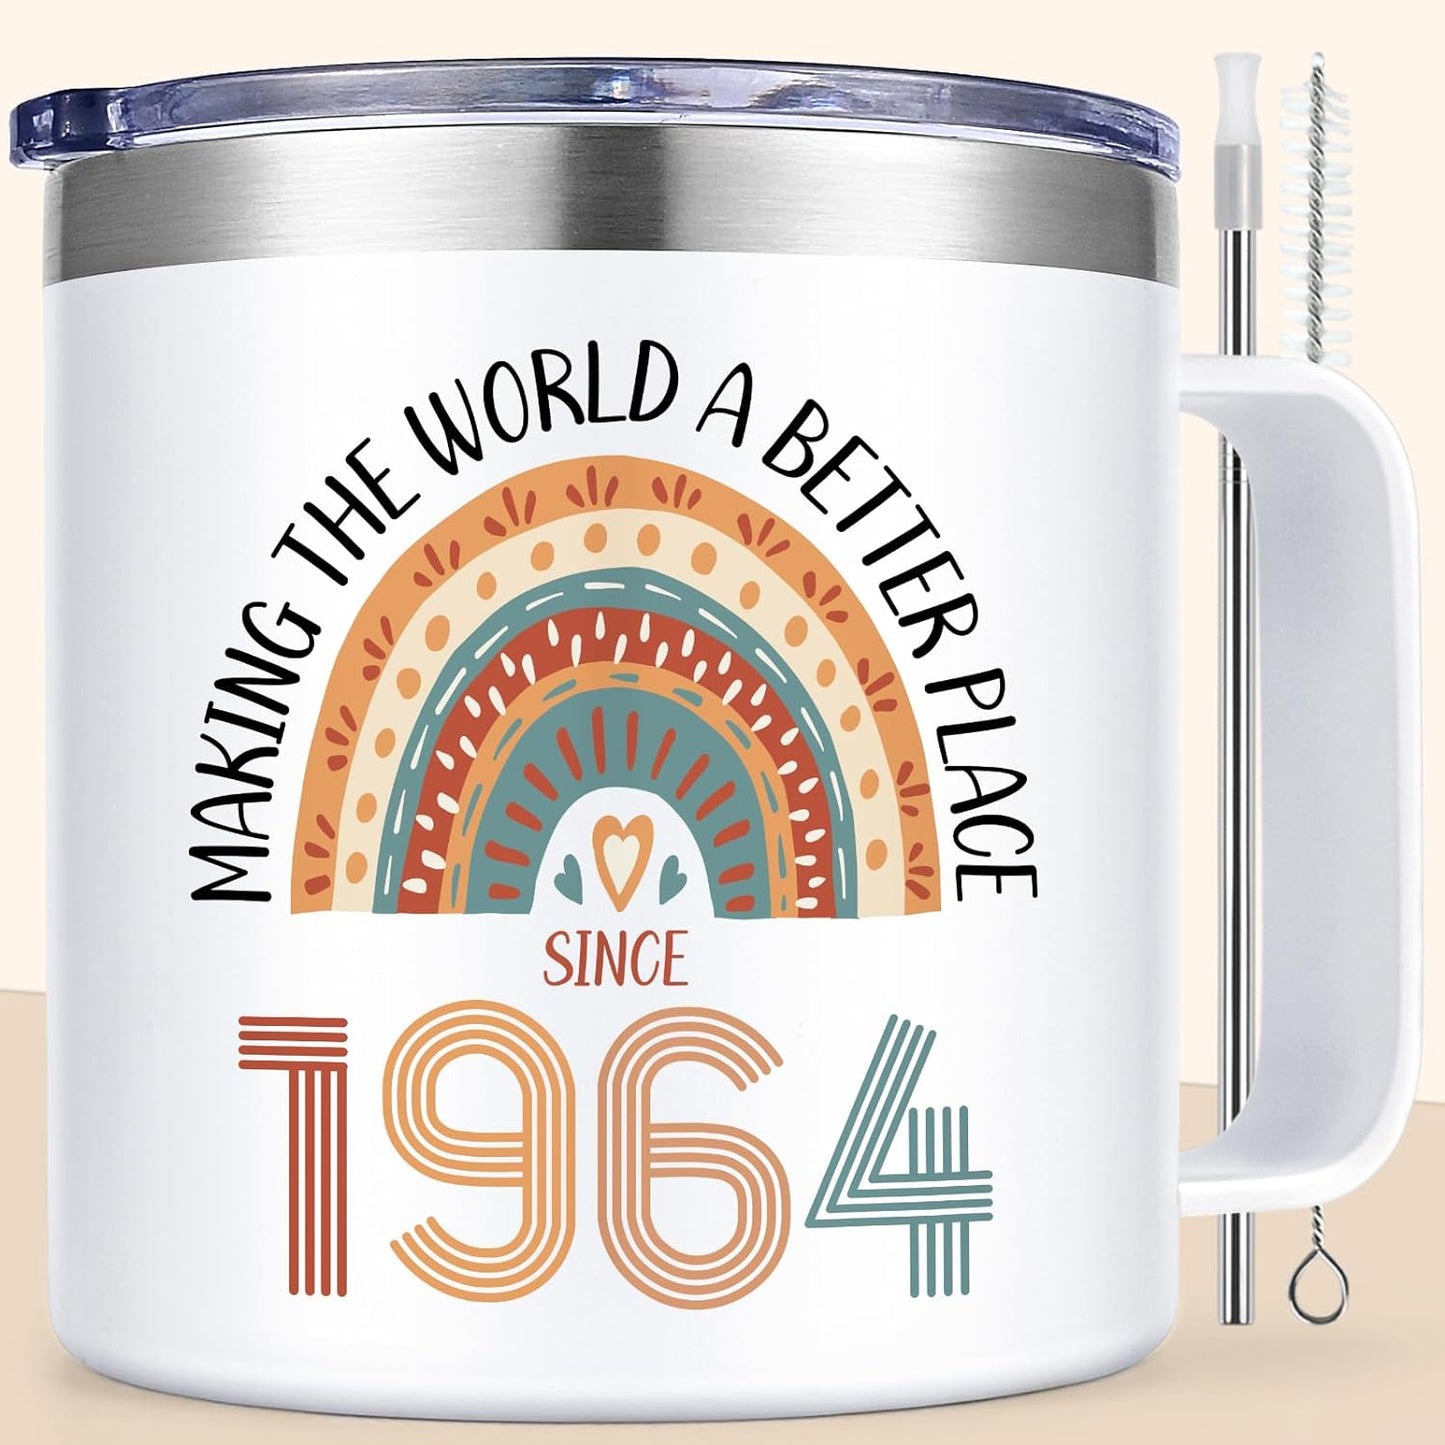 60th Birthday Gifts for Women, Vintage 1964 Birthday Gift Ideas for 60 Year Old Woman, Vintage 1964 Insulated Mug 14oz, 1964 Birthday Gifts for Mom, Wife, Friends